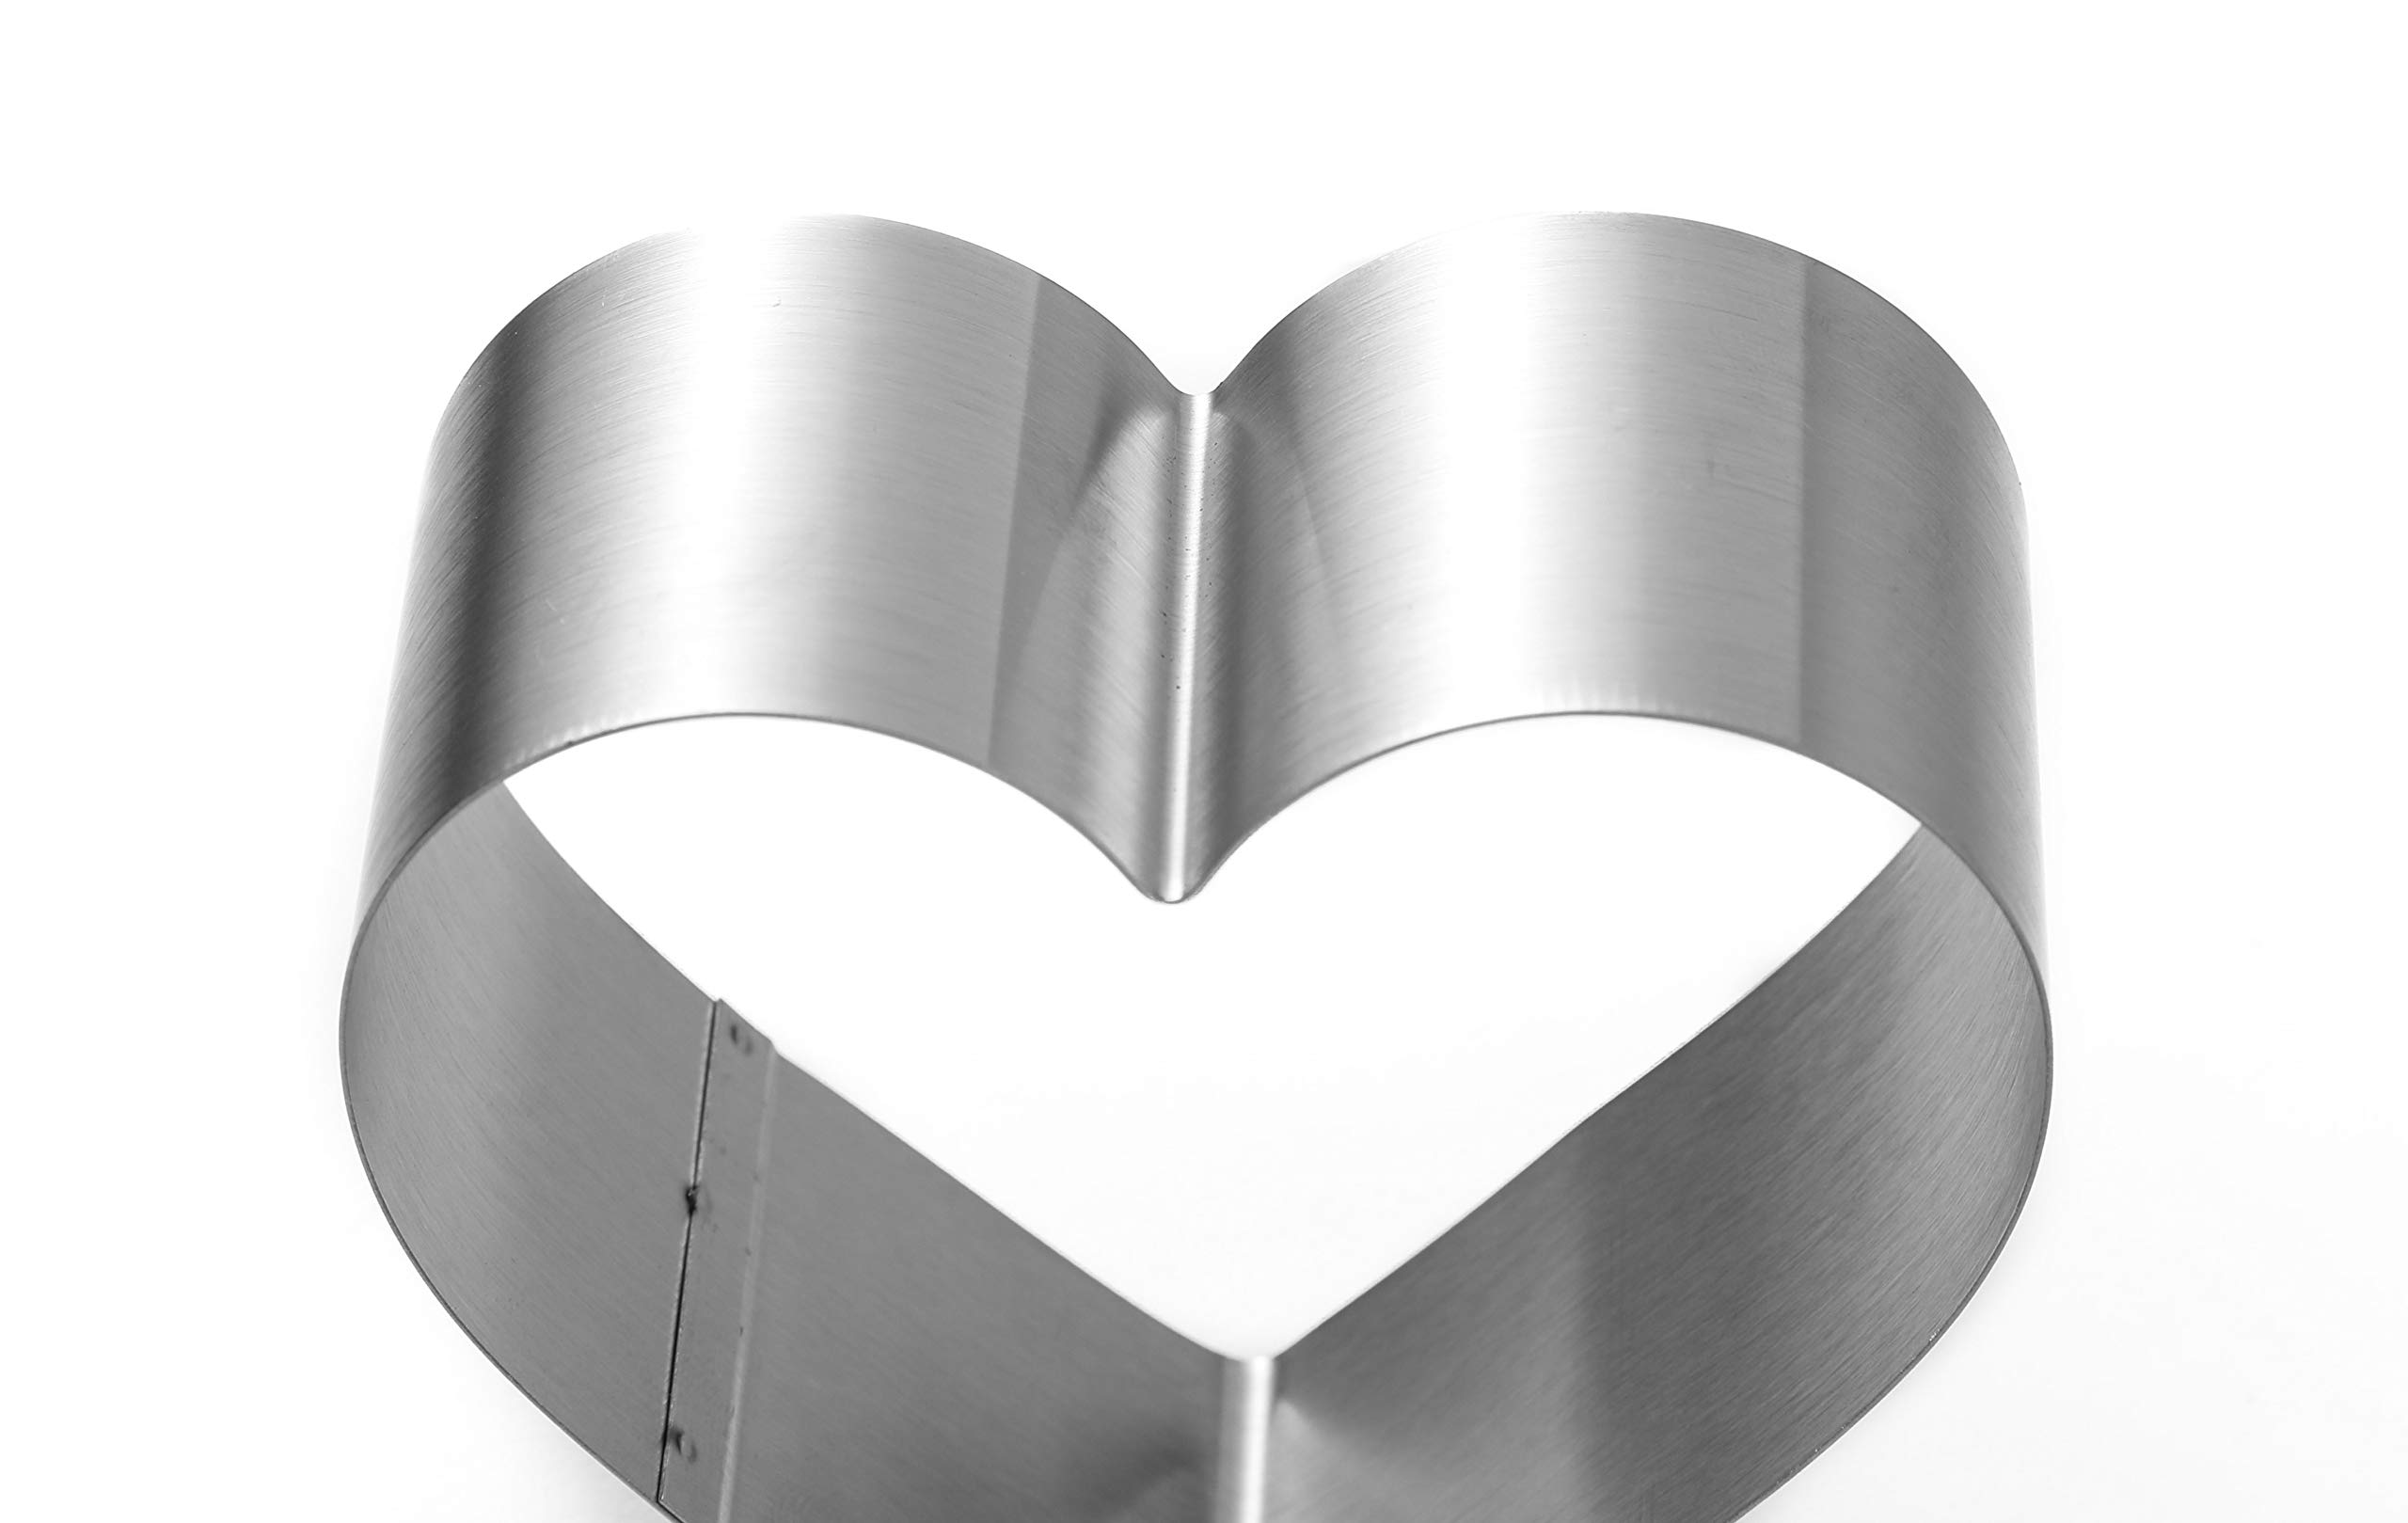 Heart Cake Mold Ring Set-4/6/8 Inch Large Heart Cookie Cutter Pancake Mold Stainless Steel